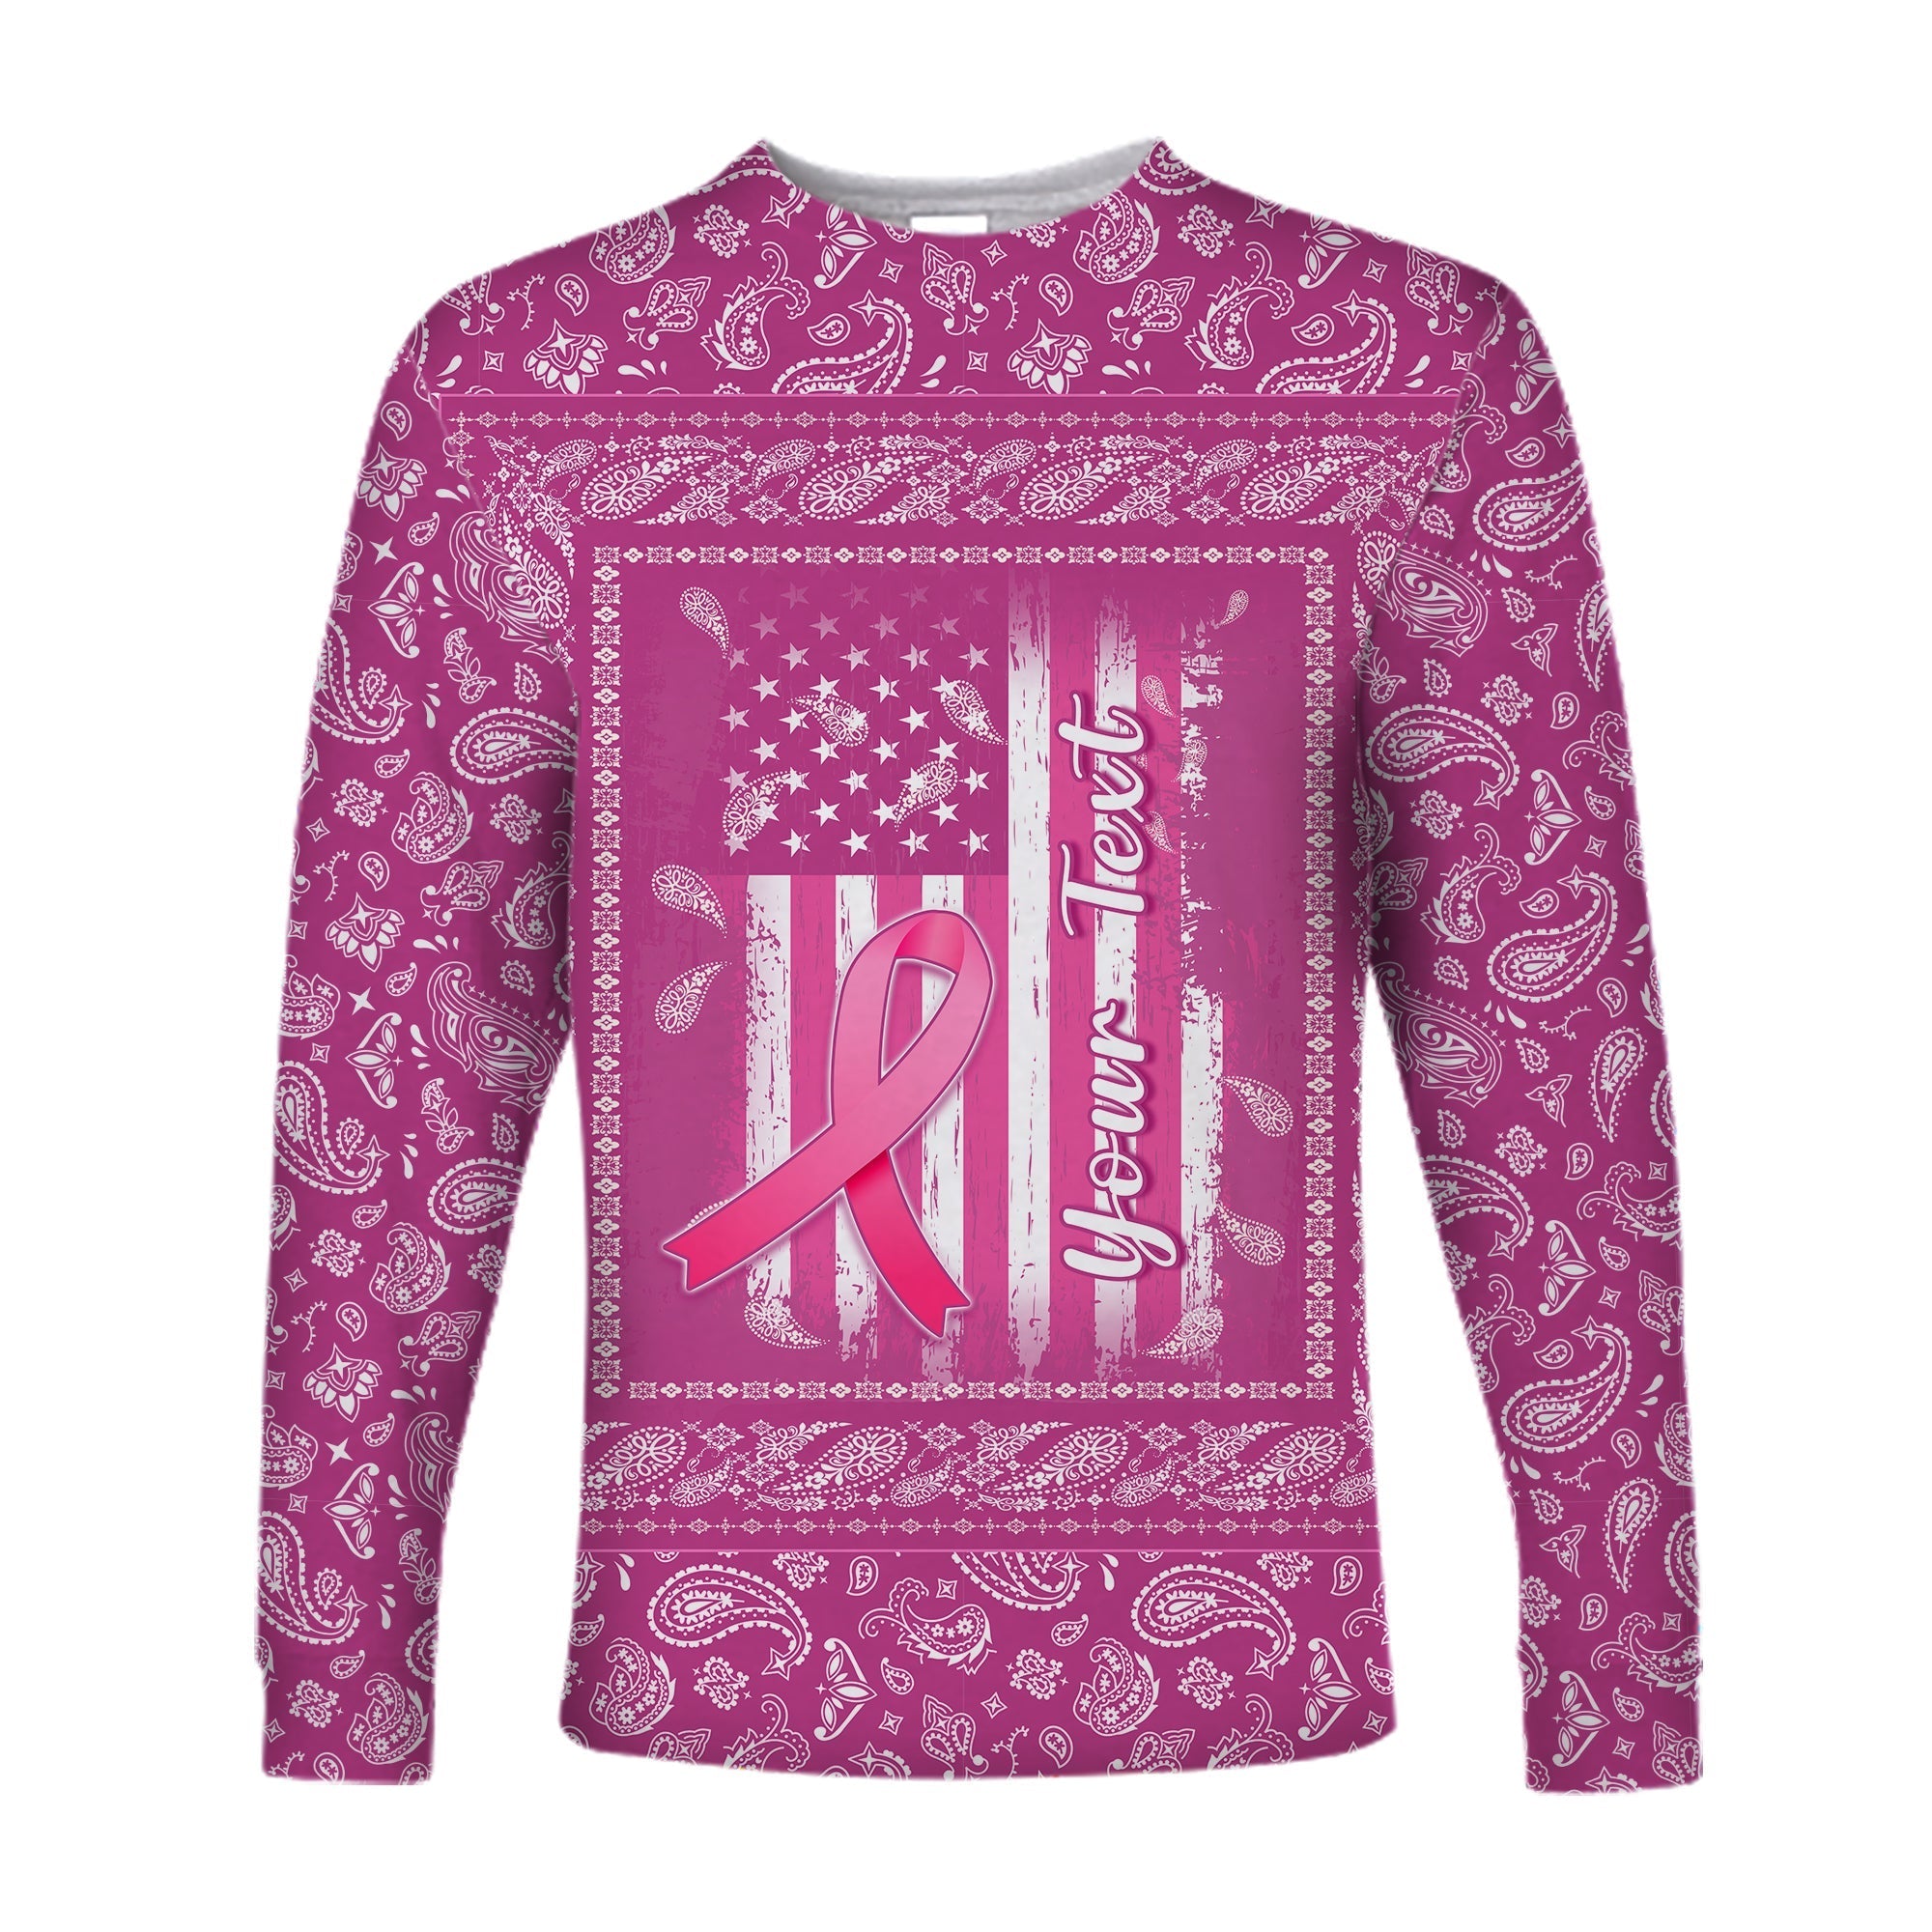 custom-personalised-breast-cancer-long-sleeve-shirt-pink-paisley-pattern-in-october-we-wear-pink